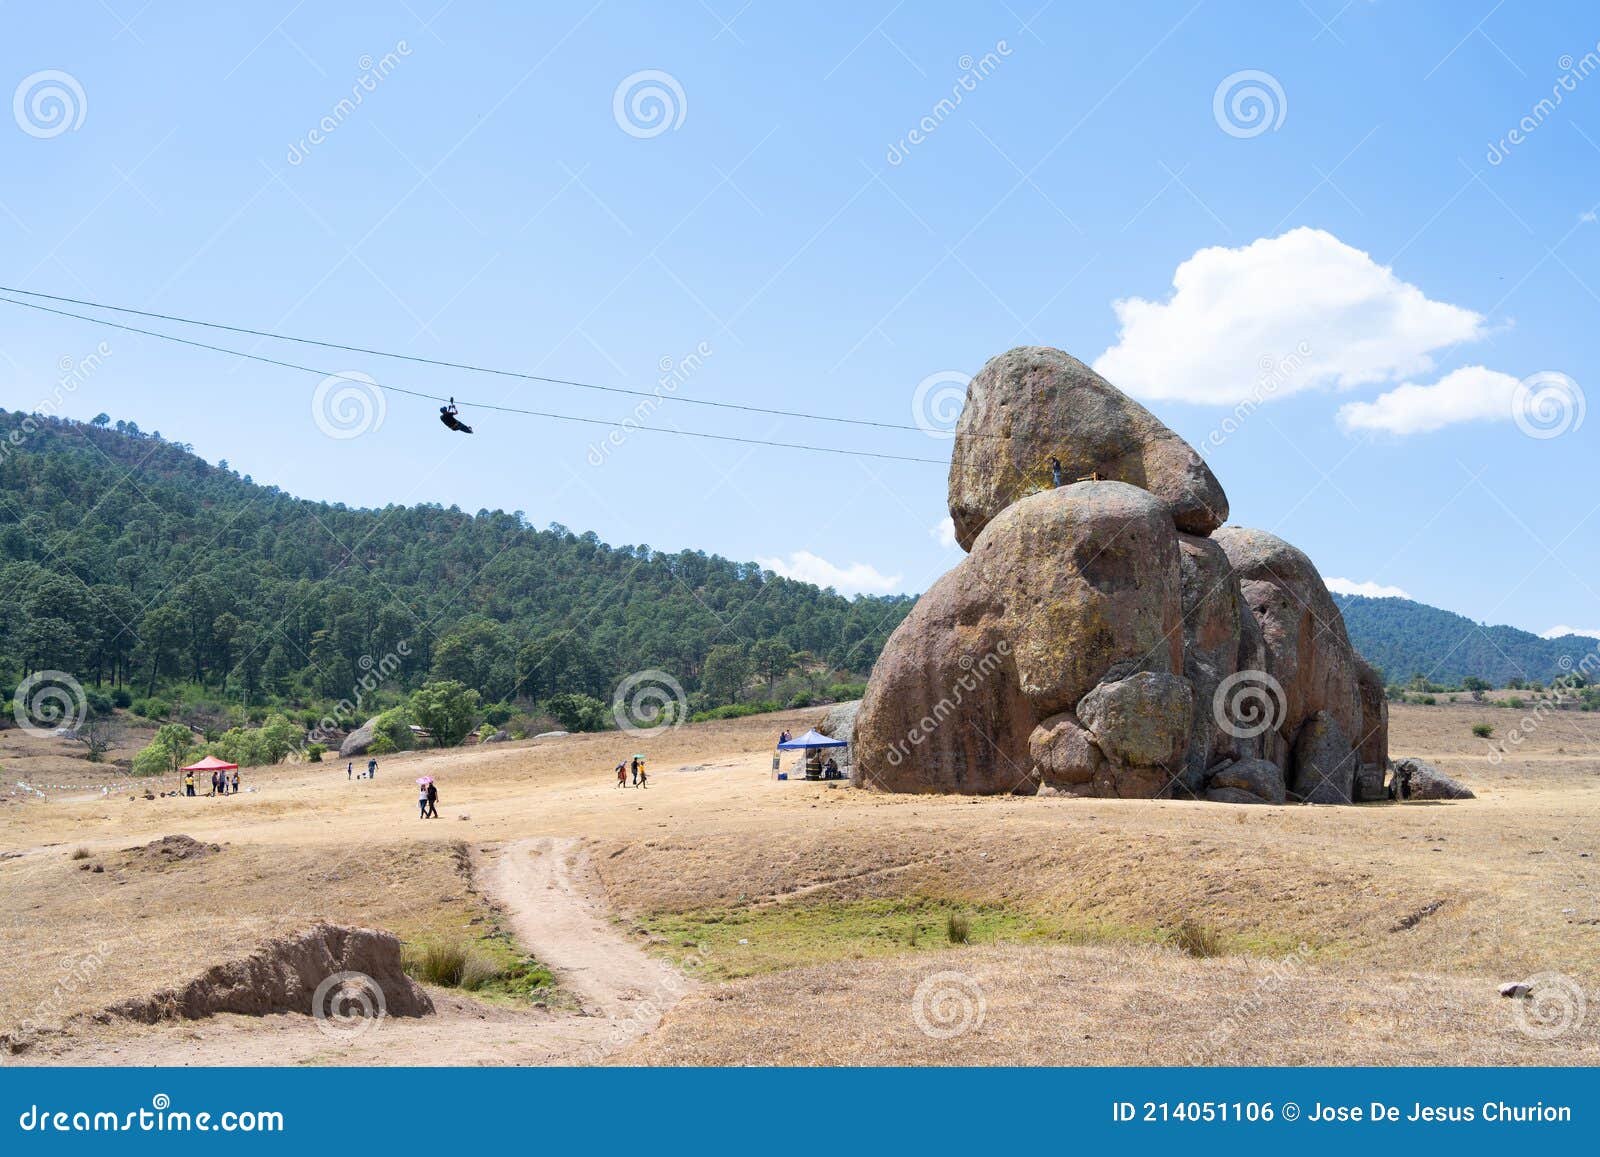 a young man travels on the zip line of the rocks of tapalpa jalisco mexico.